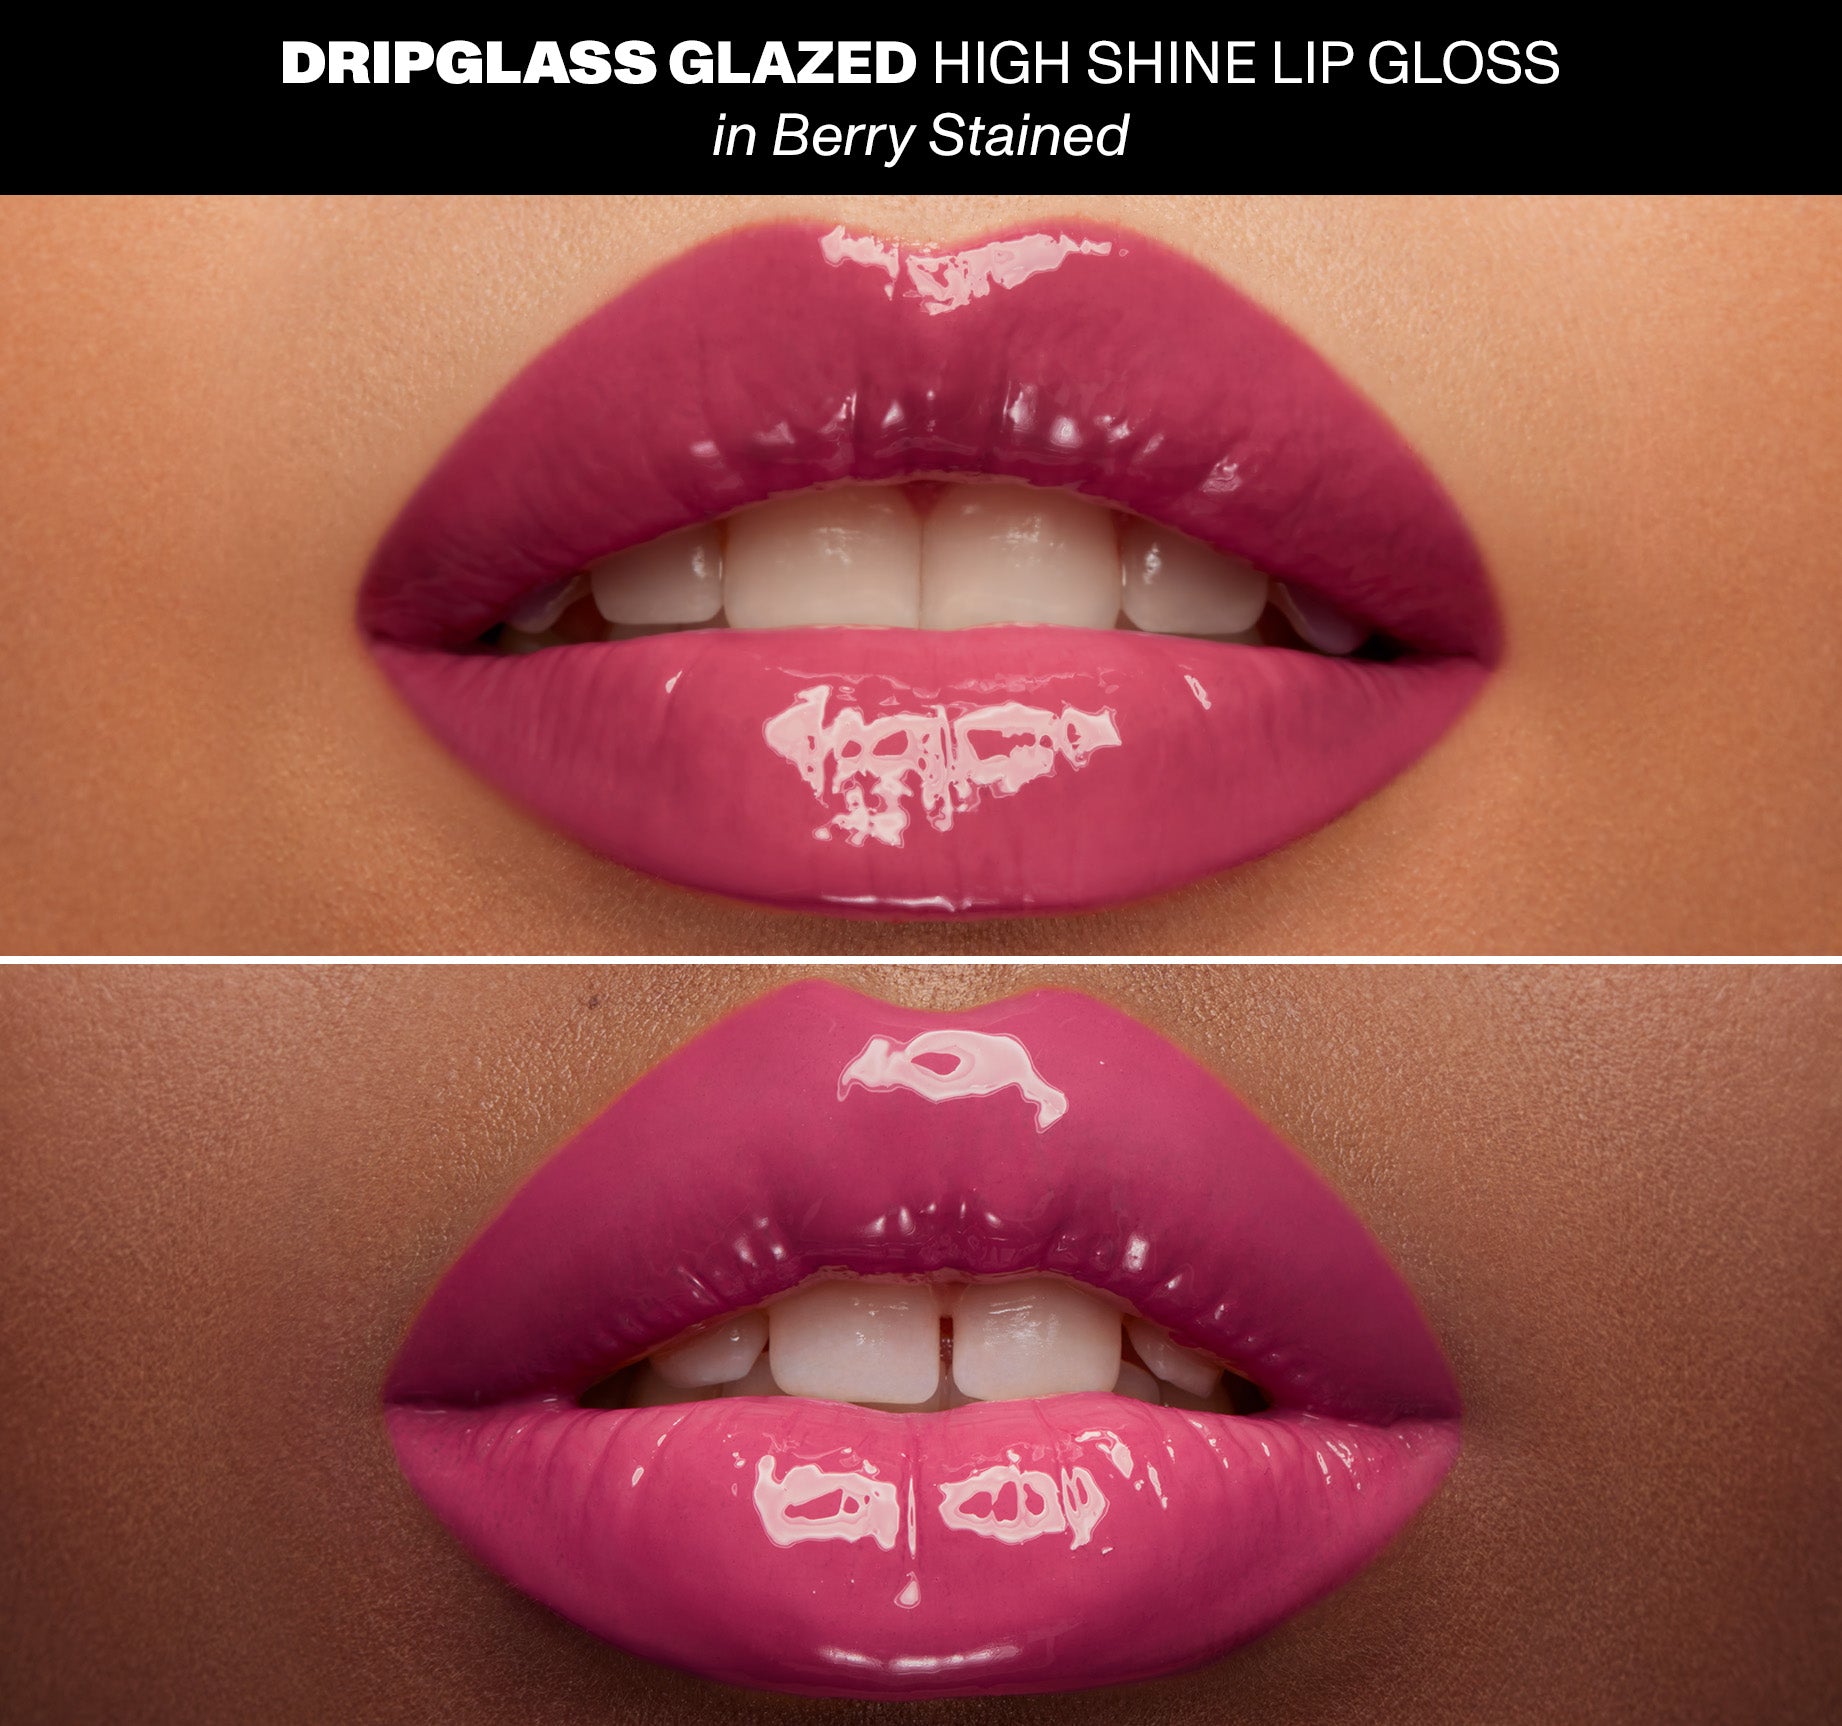 Dripglass Glazed High Shine Lip Gloss - Berry Stained - Image 4